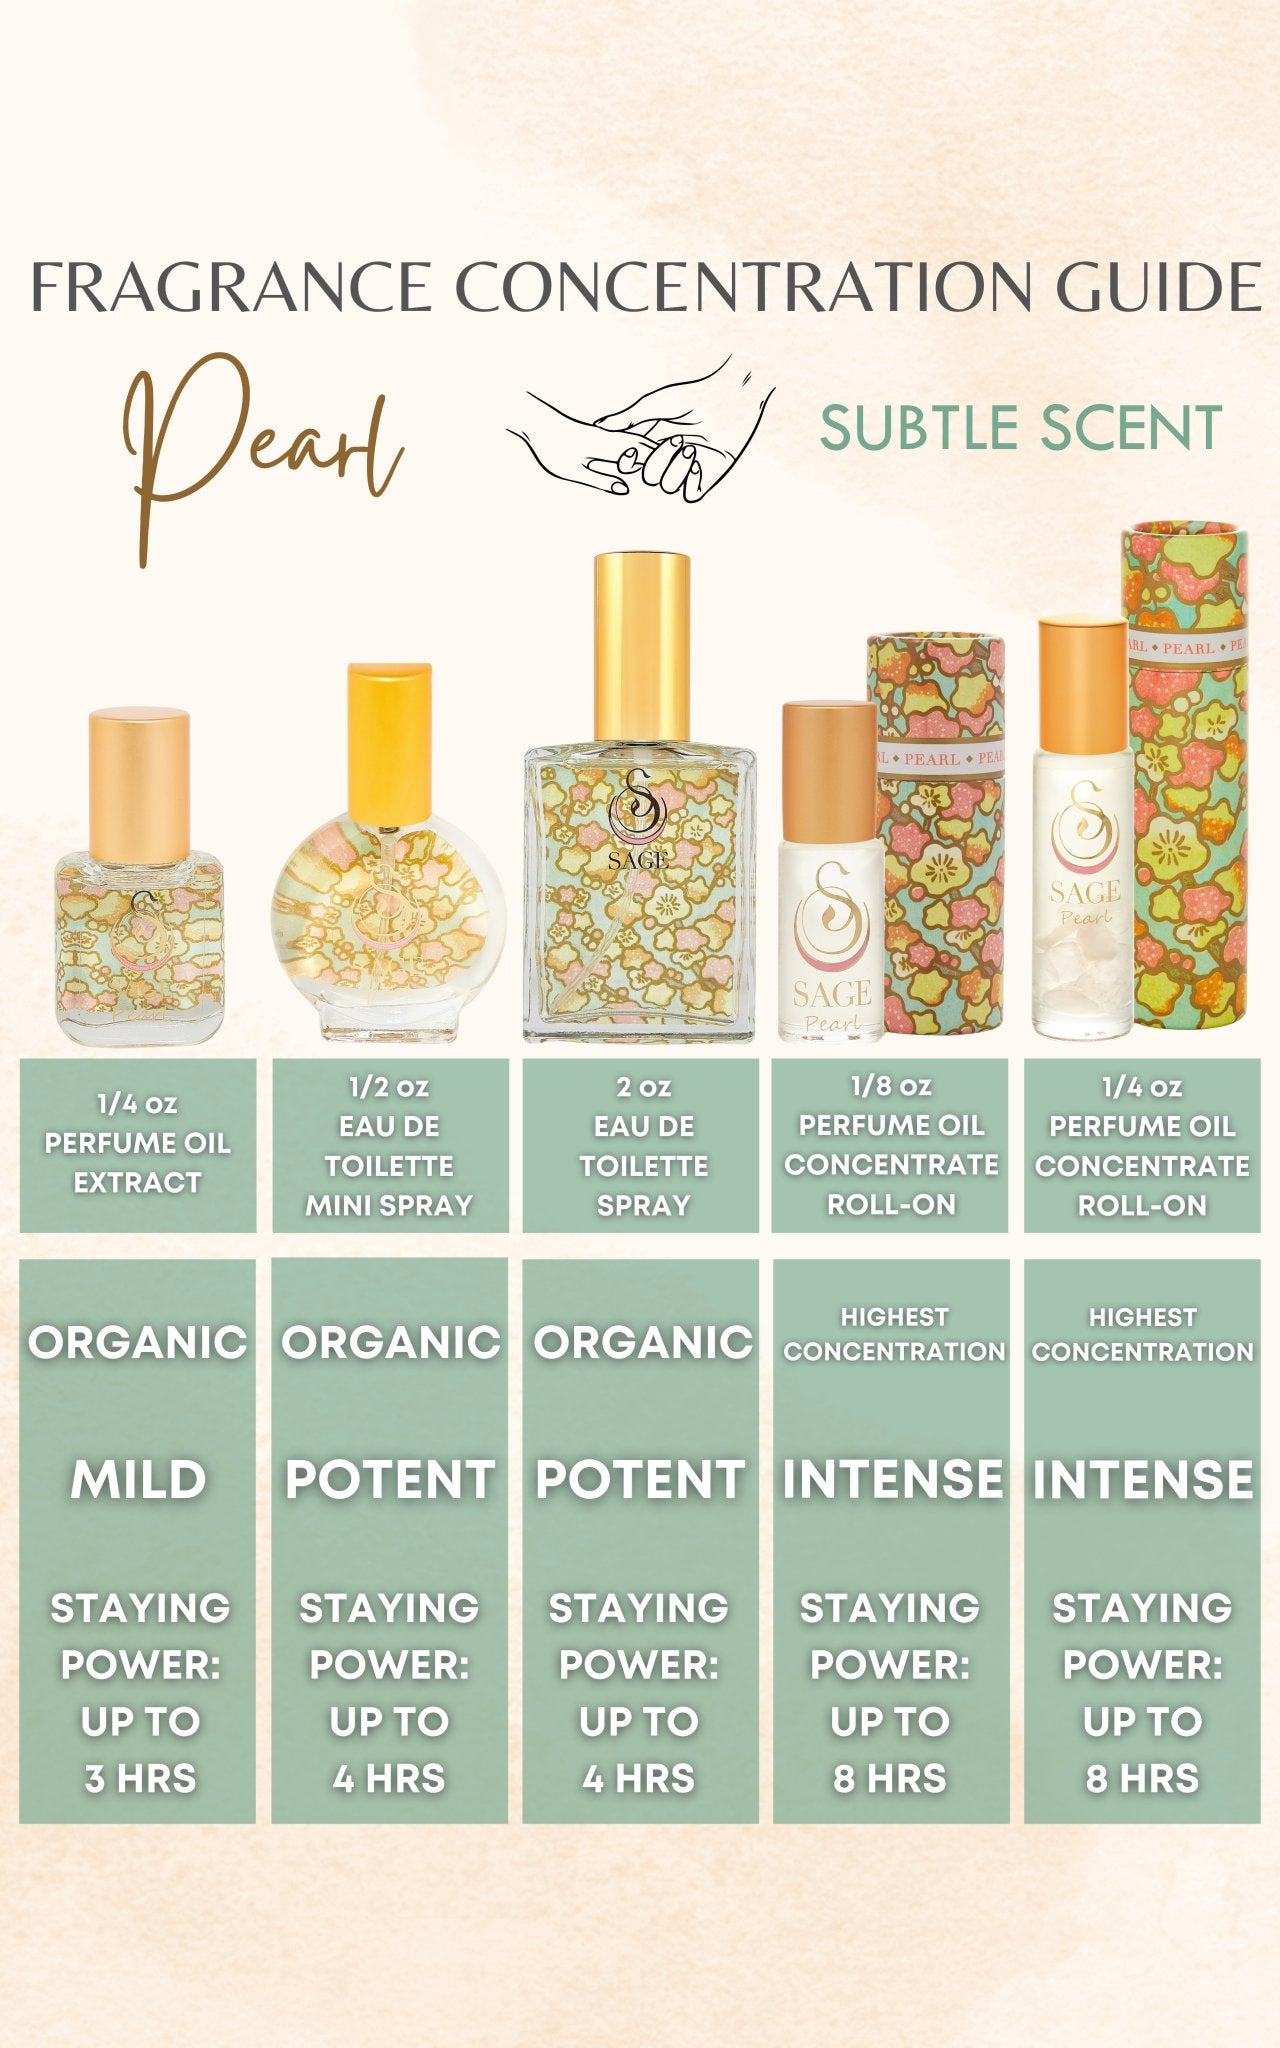 OBSESSION ~ PEARL Gemstone Perfume Oil Concentrate Roll-Ons and Eau de Toilette Gift Set by Sage - The Sage Lifestyle